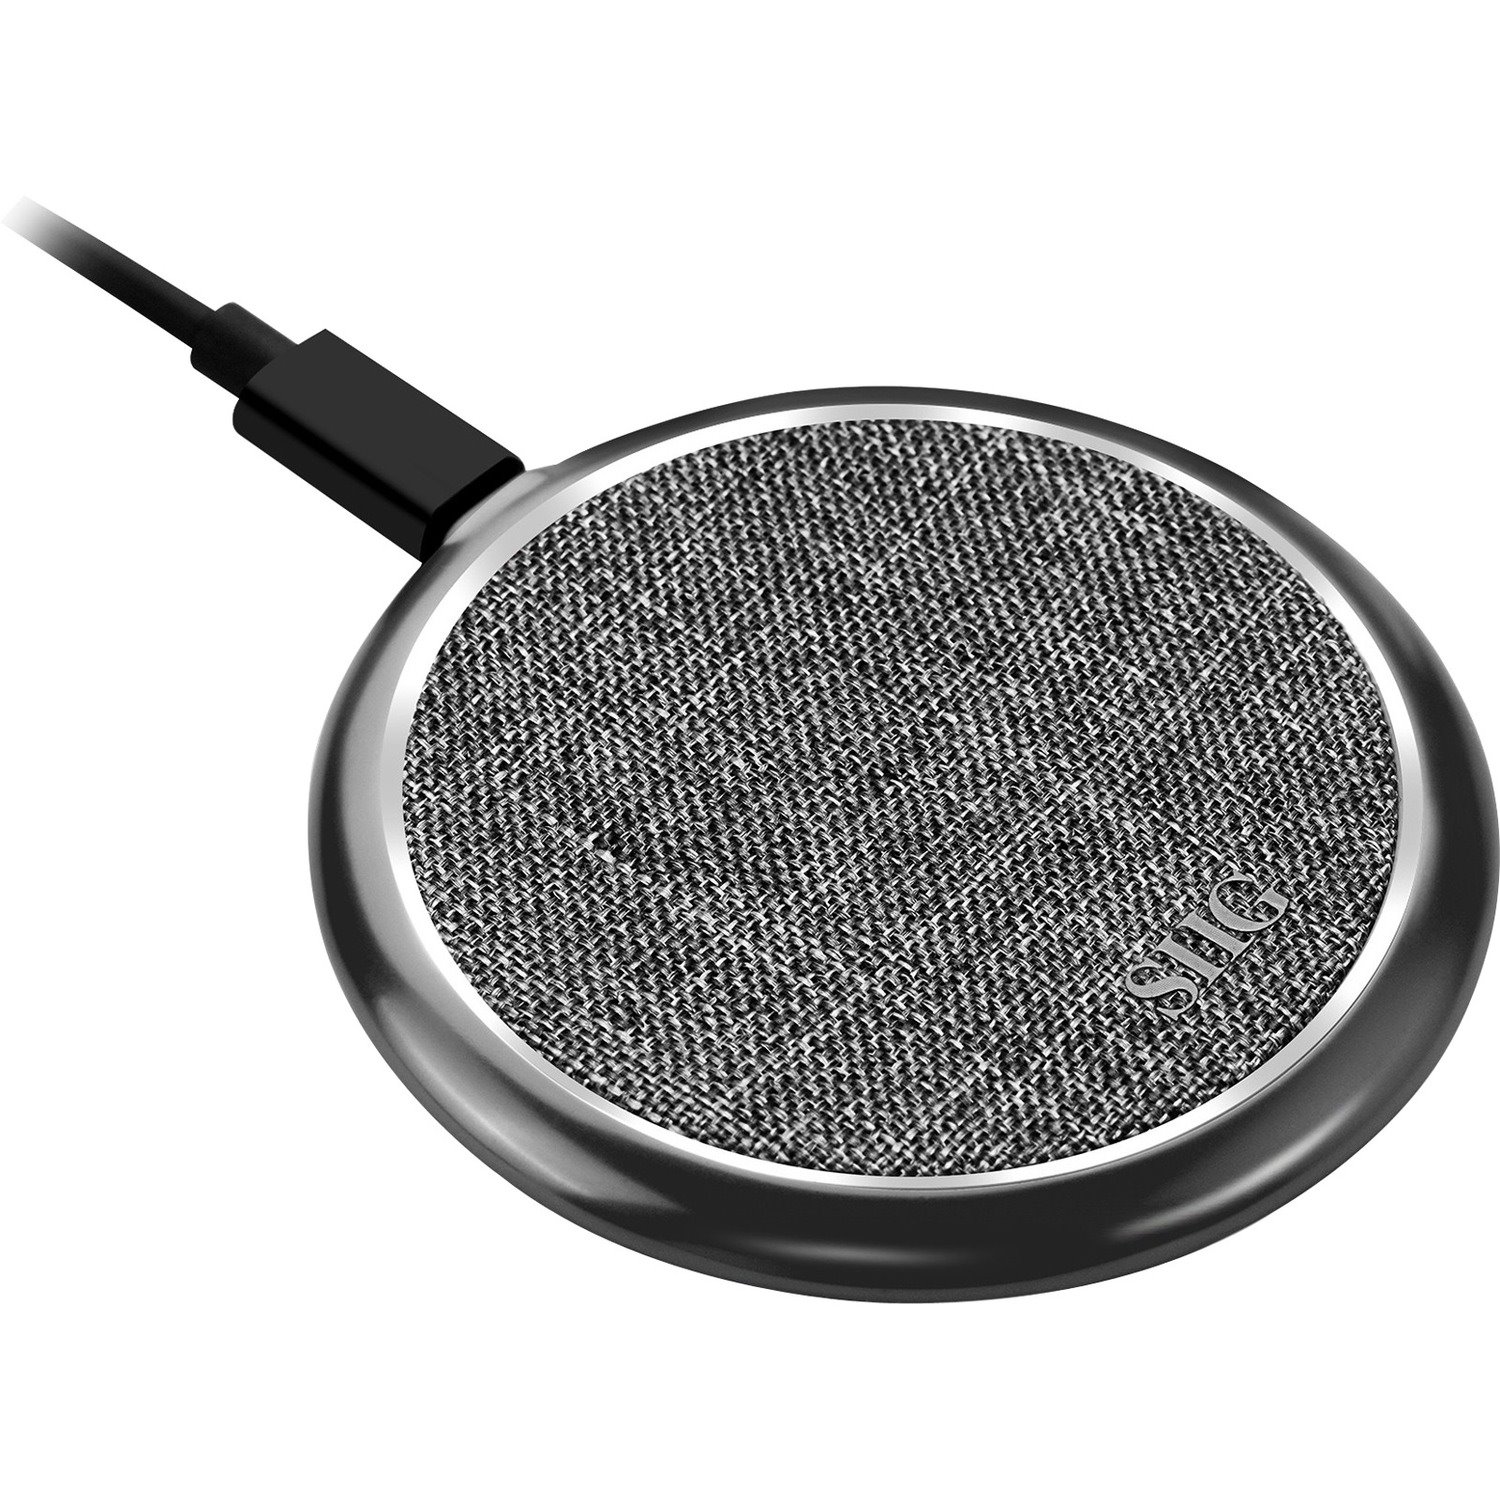 SIIG Premium Wireless Smartphone Charger Pad - Fabric